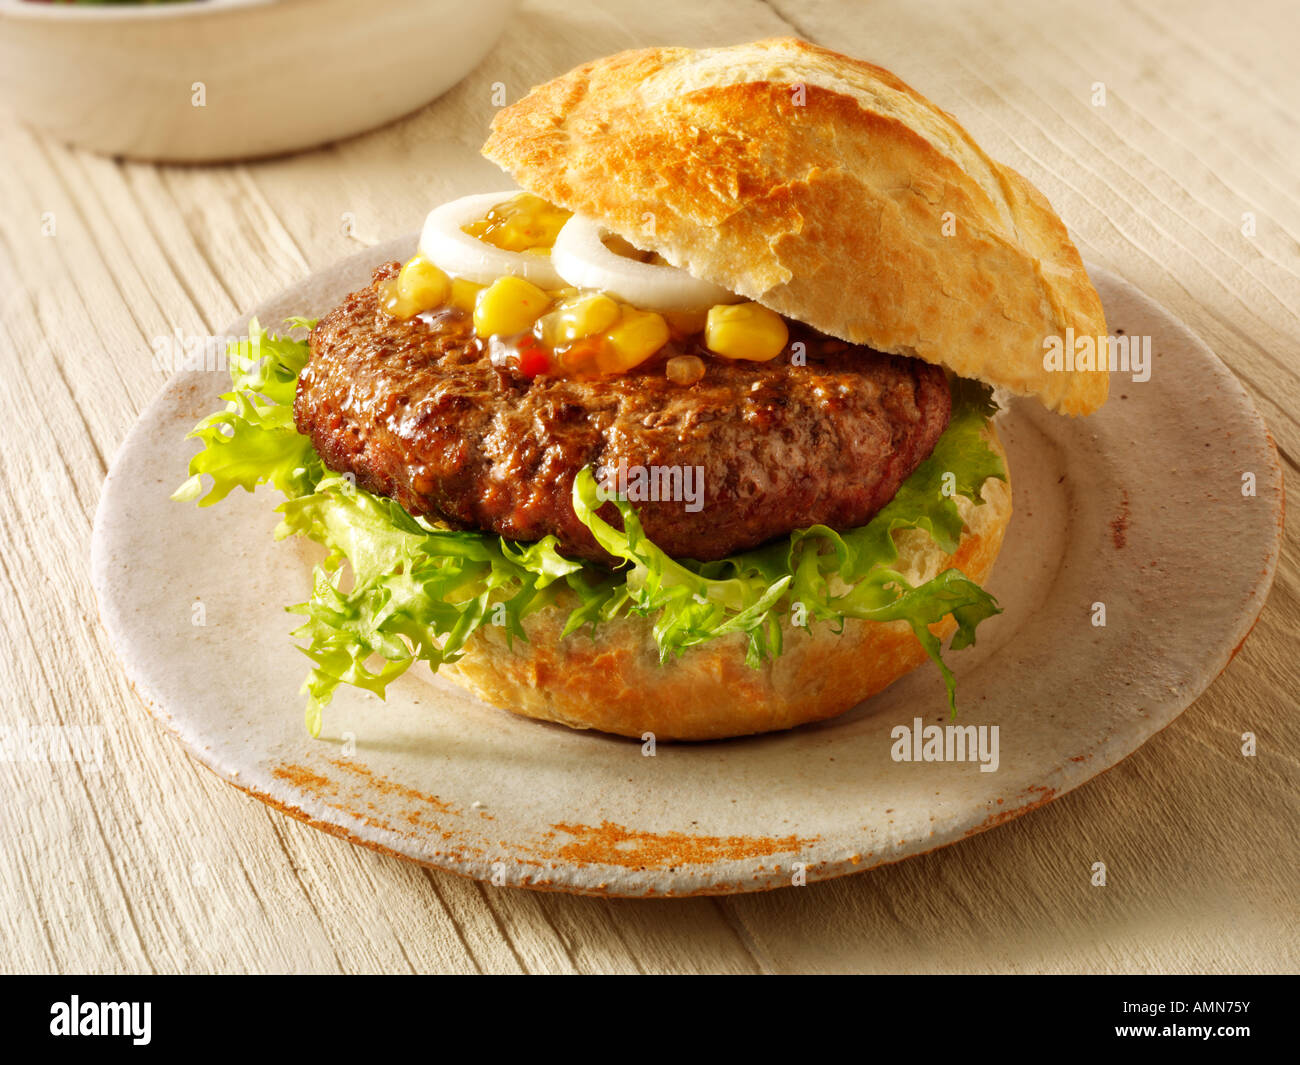 Home made burger in a crusty roll with sweetcorn relish and omion Stock Photo